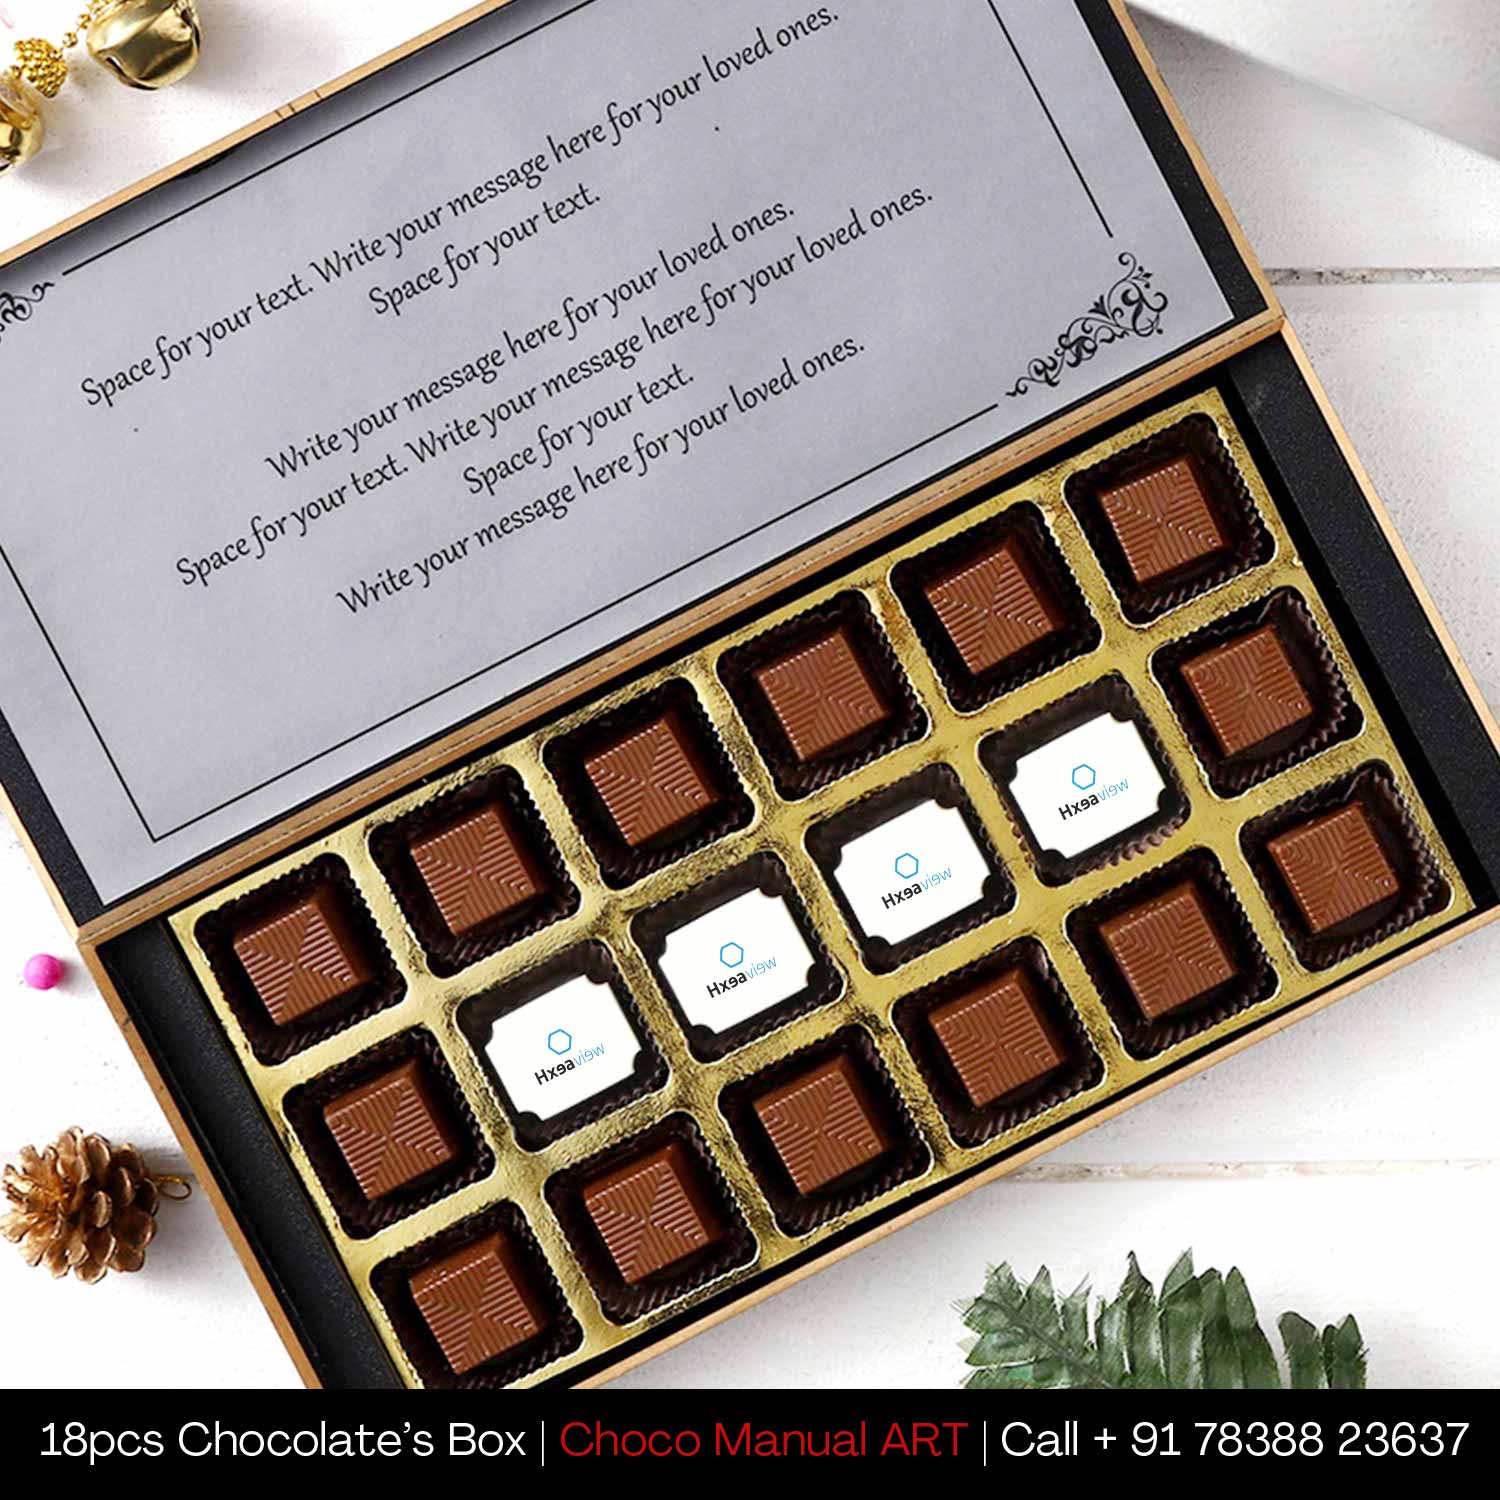 Buy/ Send Corporate Chocolate Gift Ideas for Employees & Clients